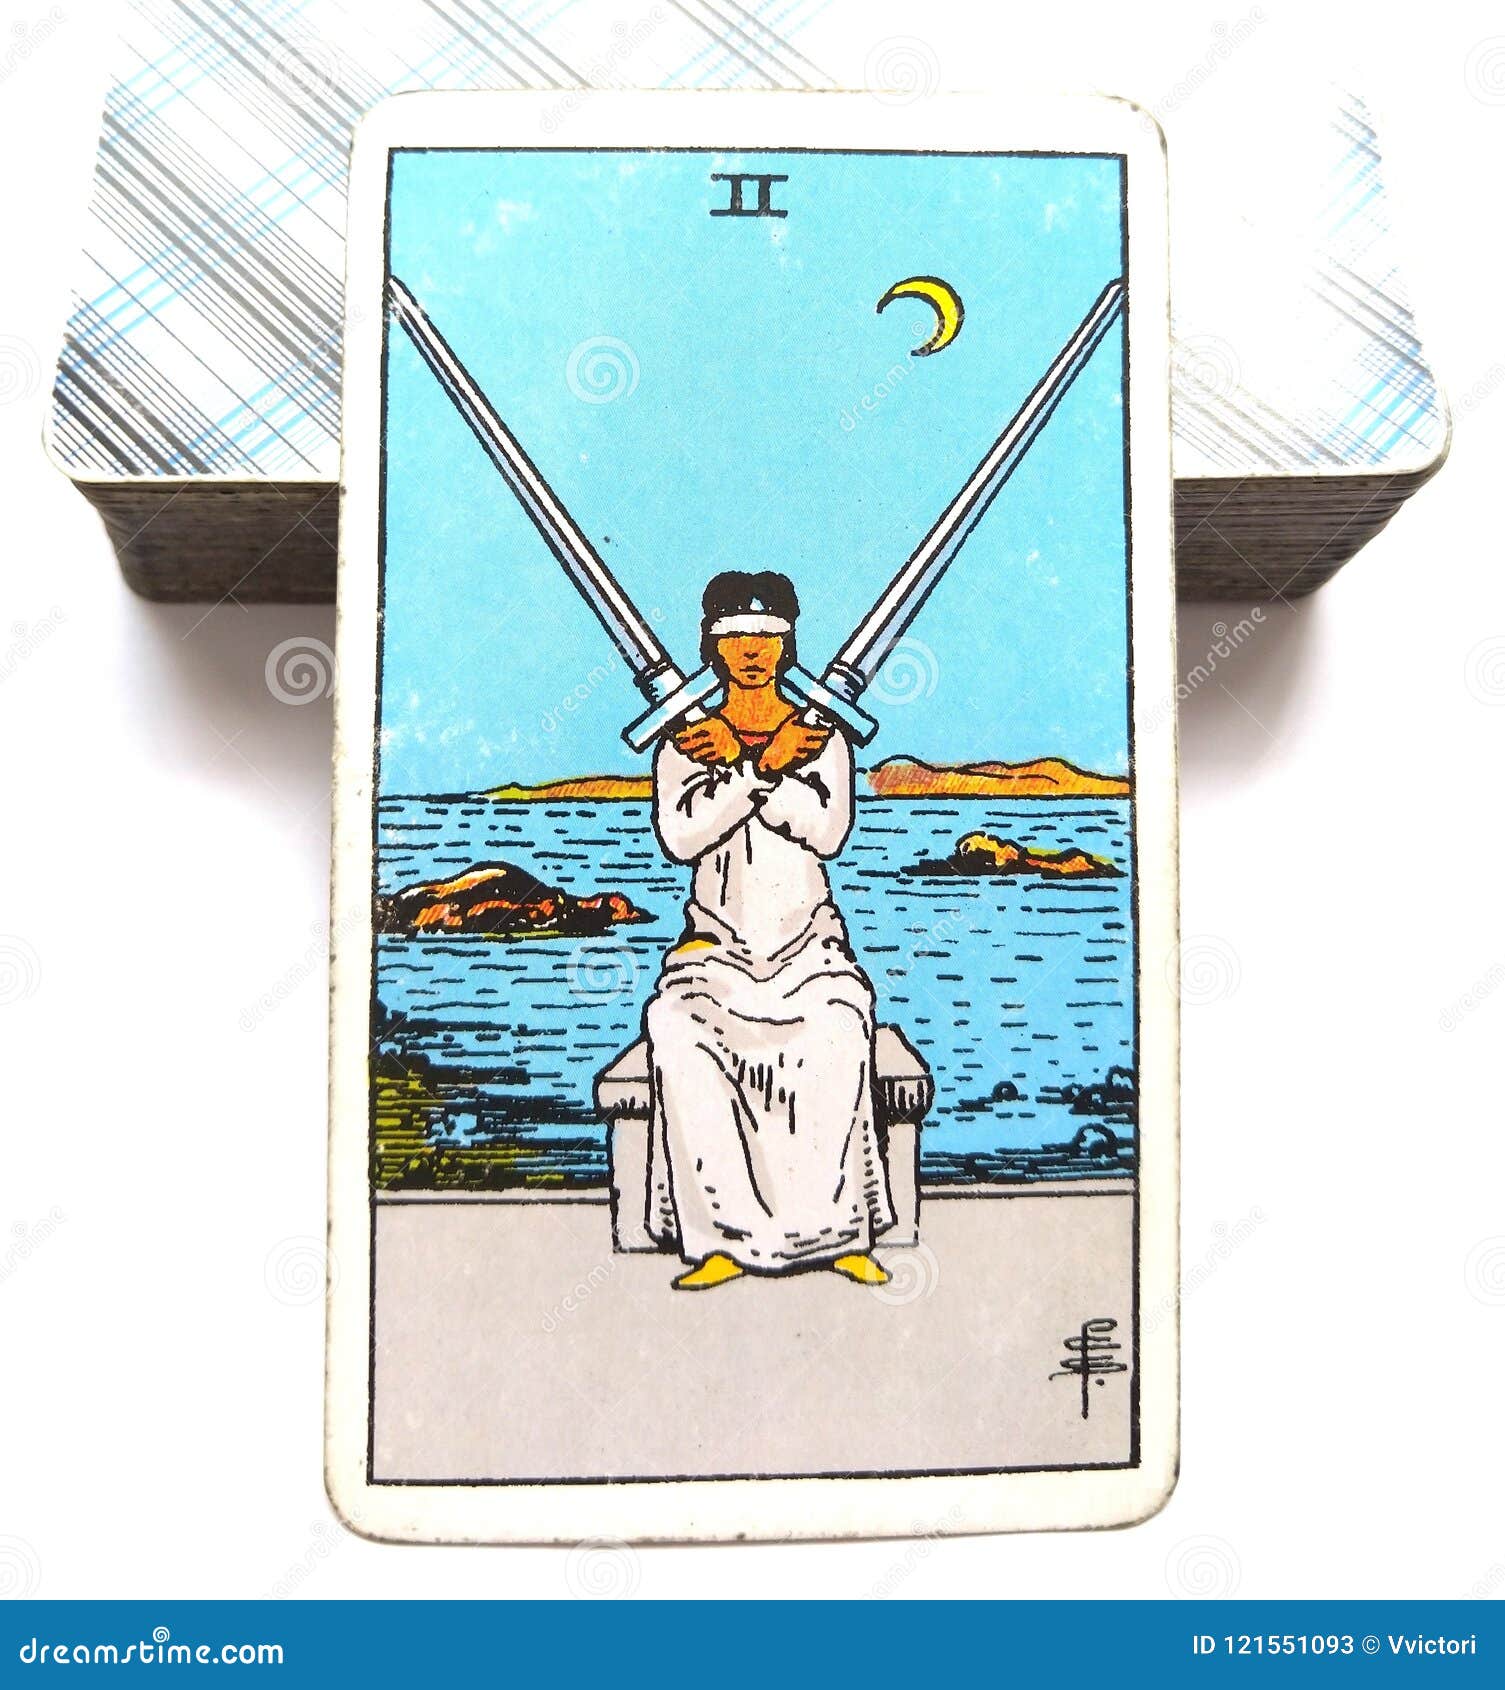 2 two of swords tarot card mental decisions stressful/painful decisions cross purposes